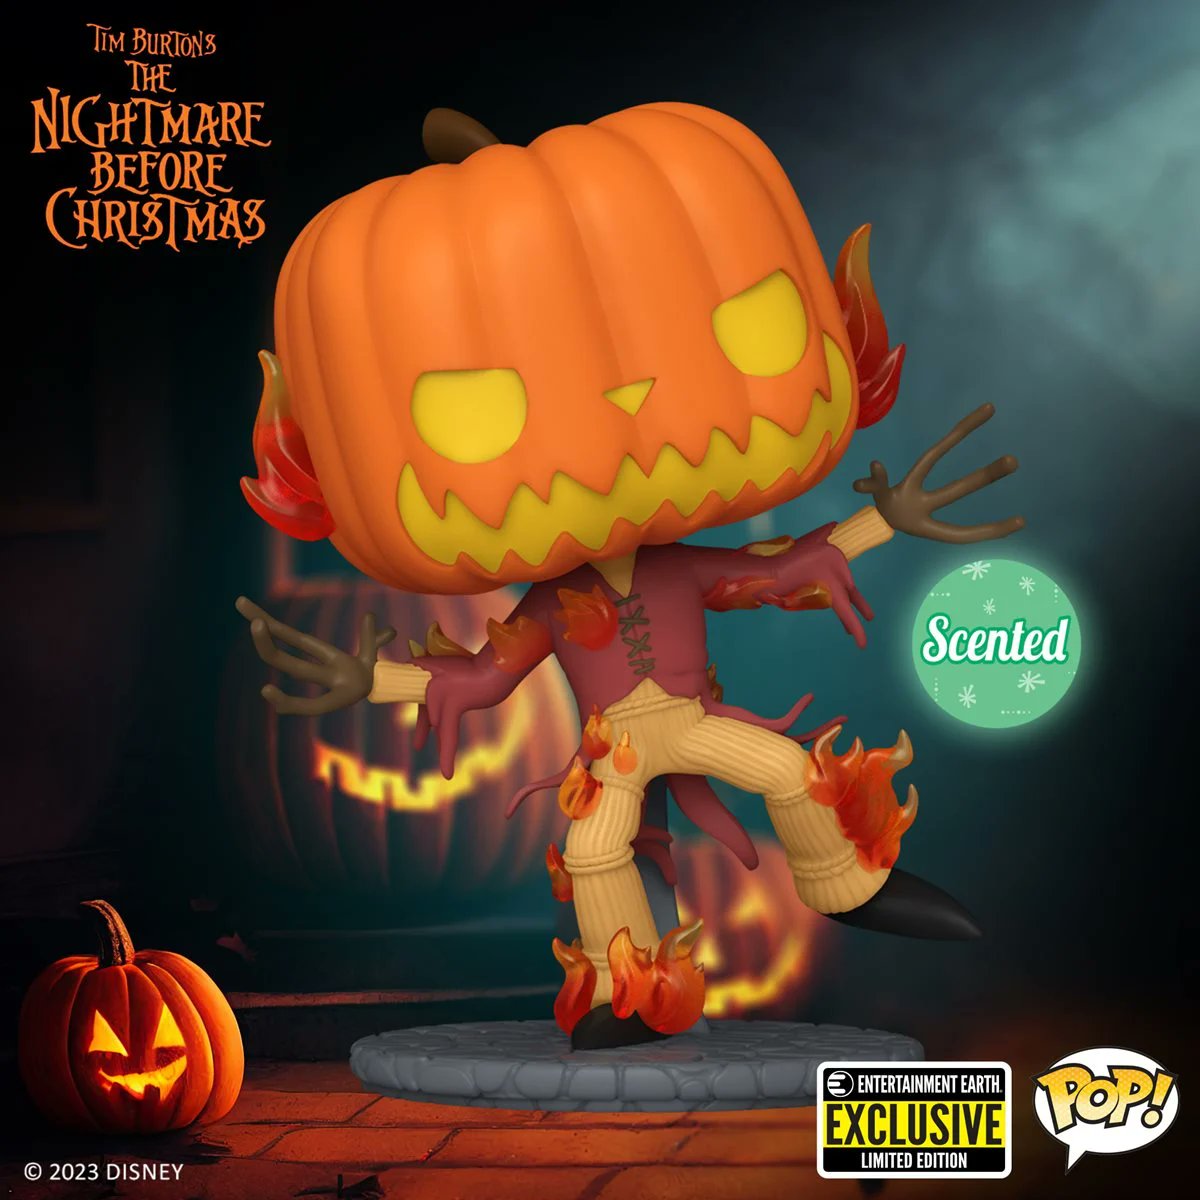 Nightmare Before Christmas 30th Anniversary Pumpkin King Scented Funko Pop - Entertainment Earth Exclusive is available for preorder:

entertainmentearth.com/product/fu30pk…

#Funko #FunkoPop #NightmareBeforeChristmas